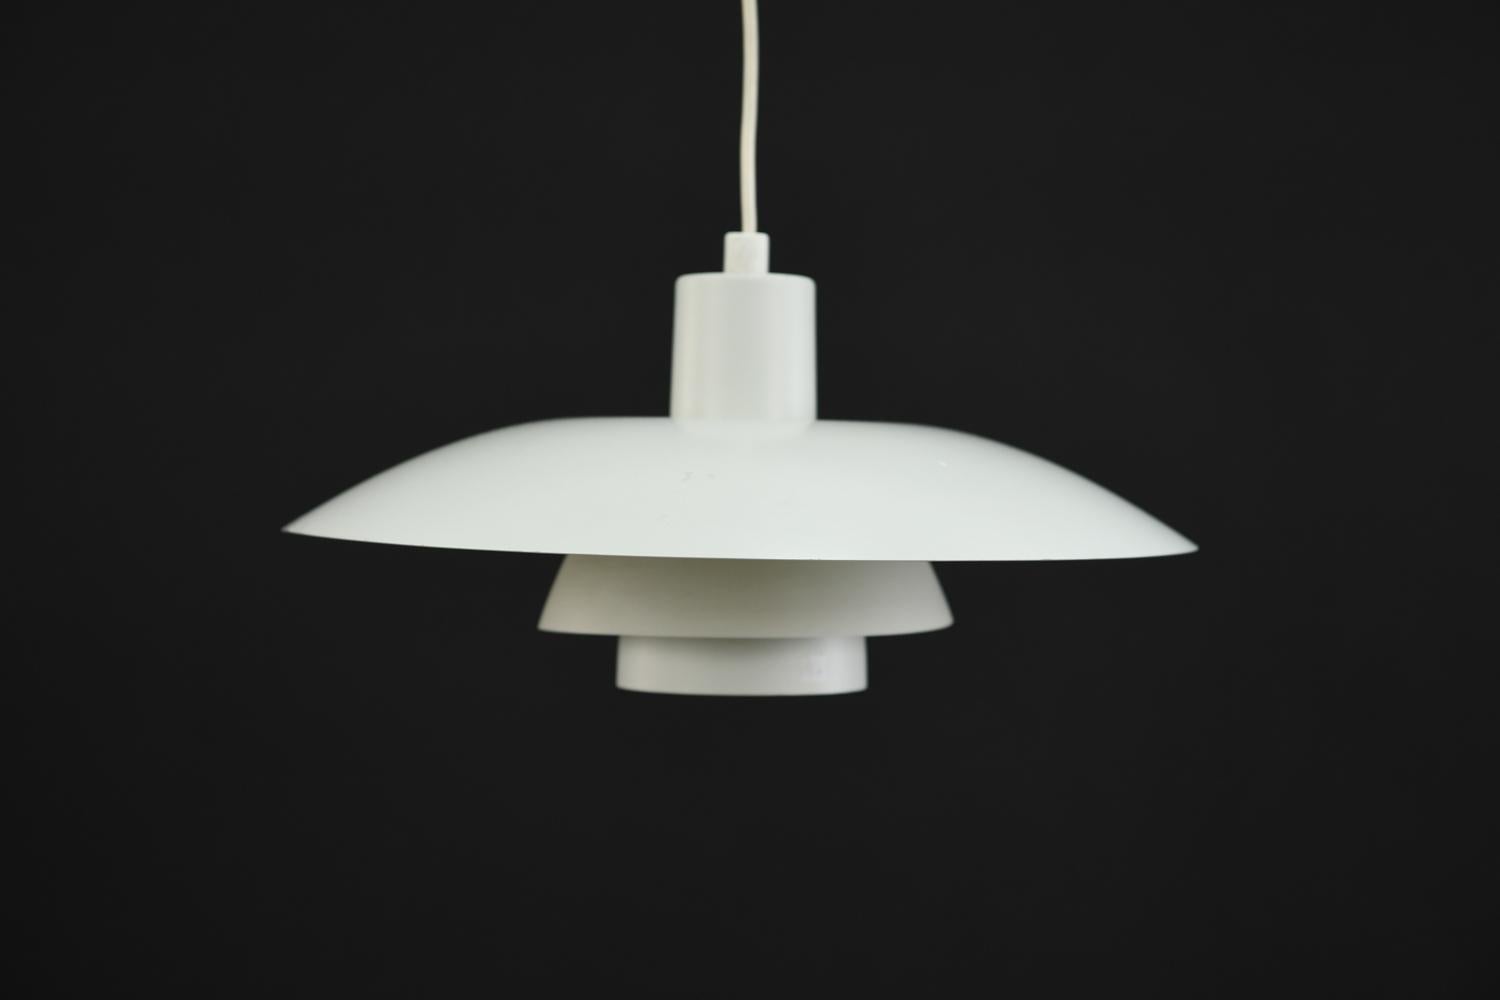 This pendant light was designed was Poul Henningsen for Louis Poulsen as part of Henningsen's groundbreaking three shade system that uses metal shades to direct uniform, downwards lighting. This model PH4/3 pendant light has a clean, modern look